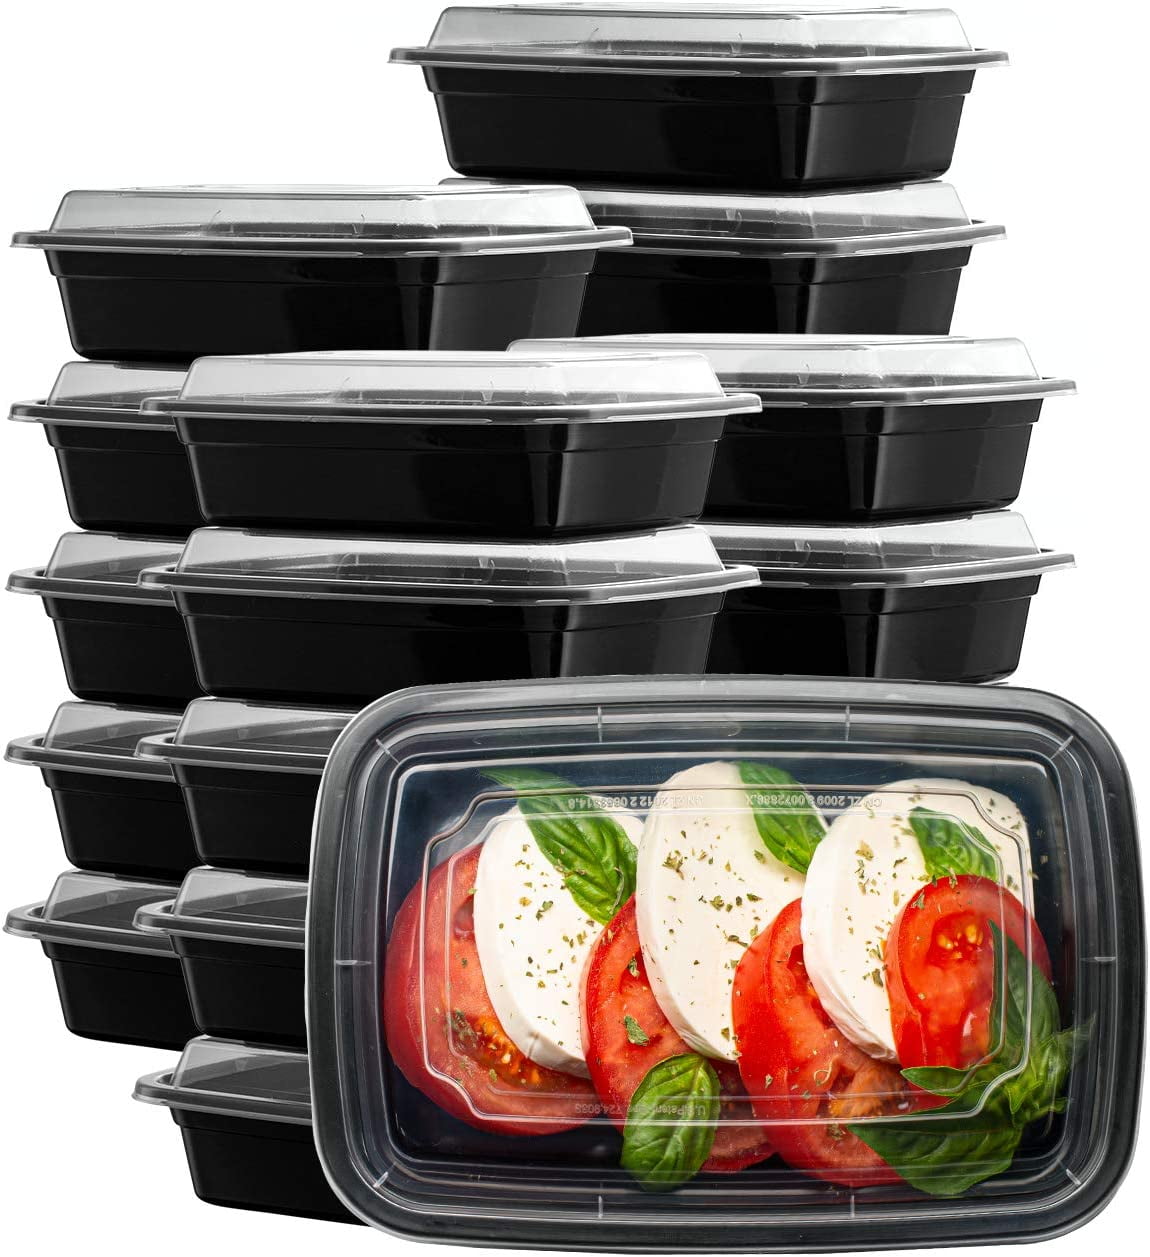 Enther Meal Prep Containers 20 pack 1 Compartment with Lids, Food Storage  Bento BPA Free | Stackable…See more Enther Meal Prep Containers 20 pack 1